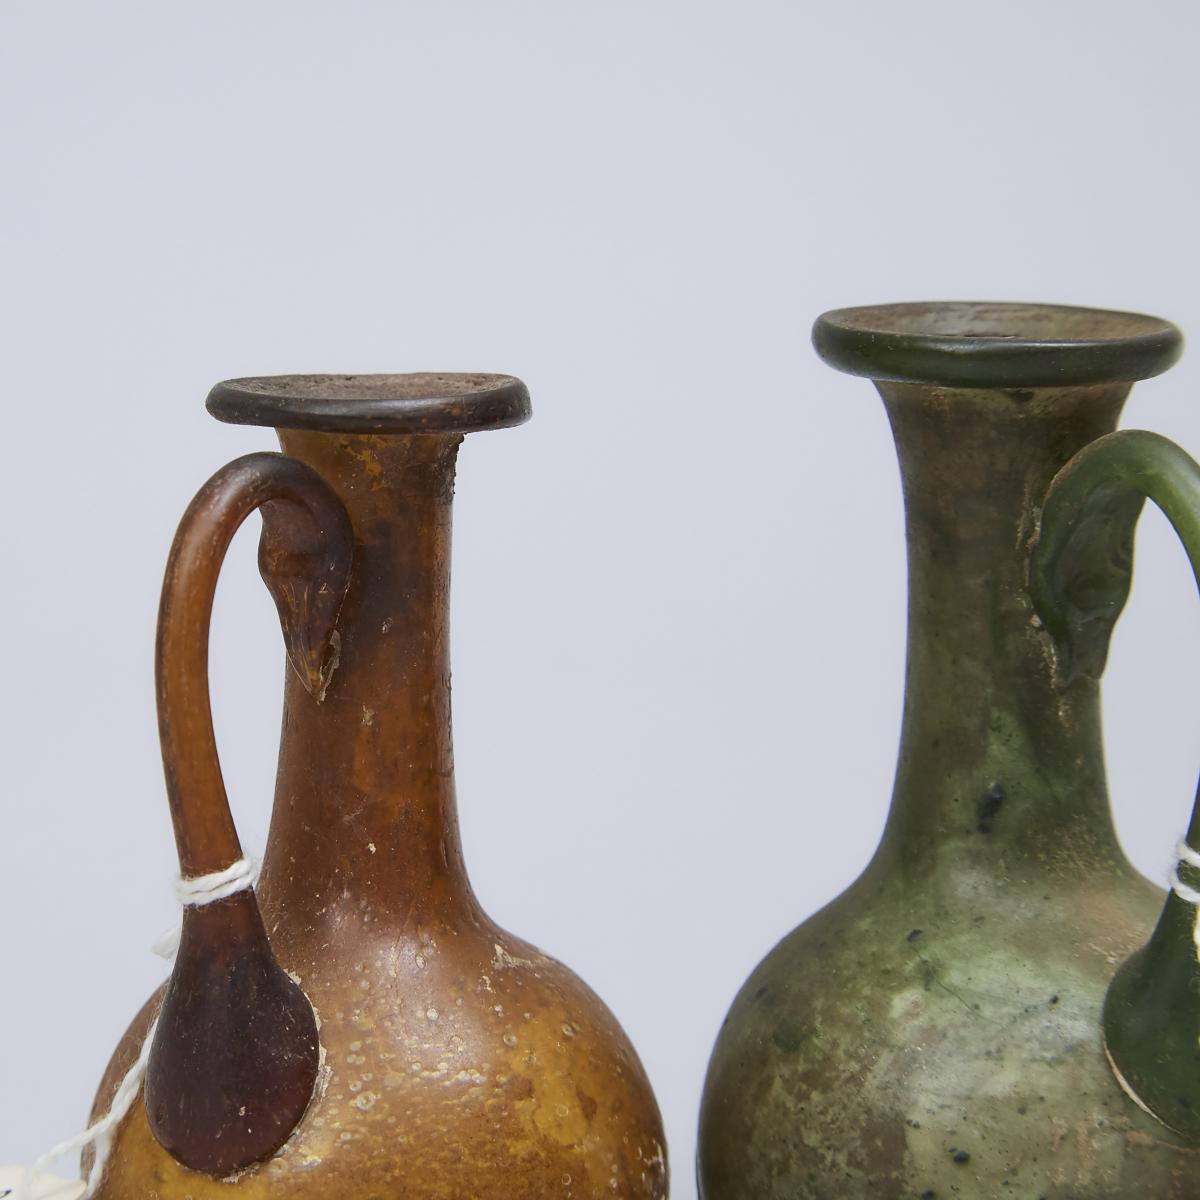 Two Roman Glass Juglets, 100-200 A.D., height 3.7 in — 9.5 cm - Image 3 of 5